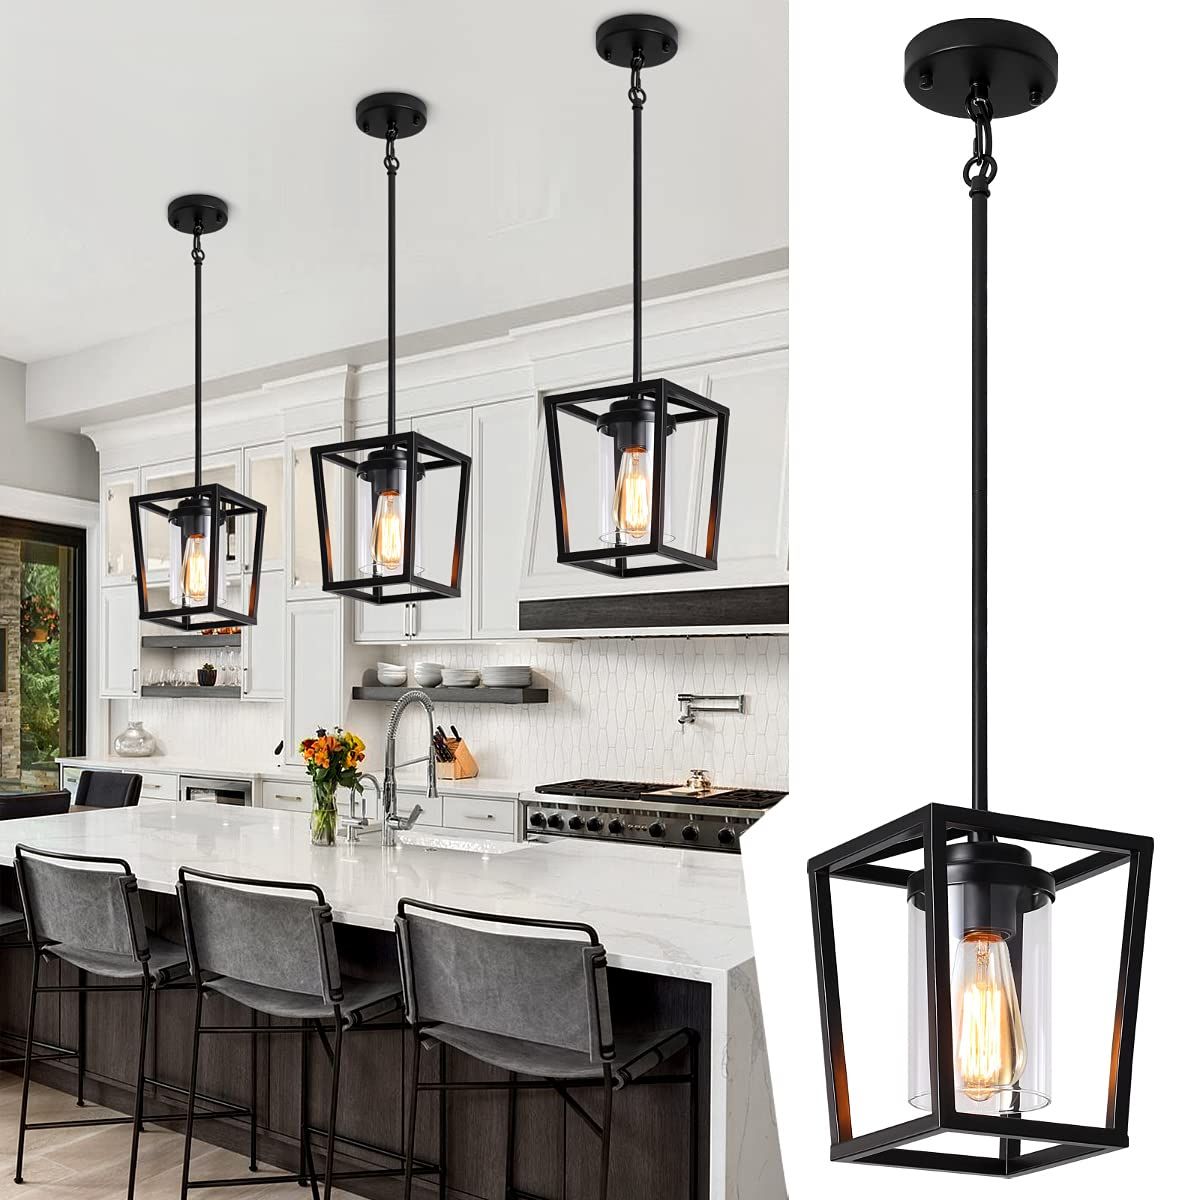 Clear Glass Shade Lantern Chandeliers In Well Known Black Pendant Light For Kitchen Island, 1 Light Farmhouse Industrial Lantern  Pendant Light For Hallway Foyer Dinning Room With Clear Glass Shade,  Adjustable Height – – Amazon (View 6 of 10)